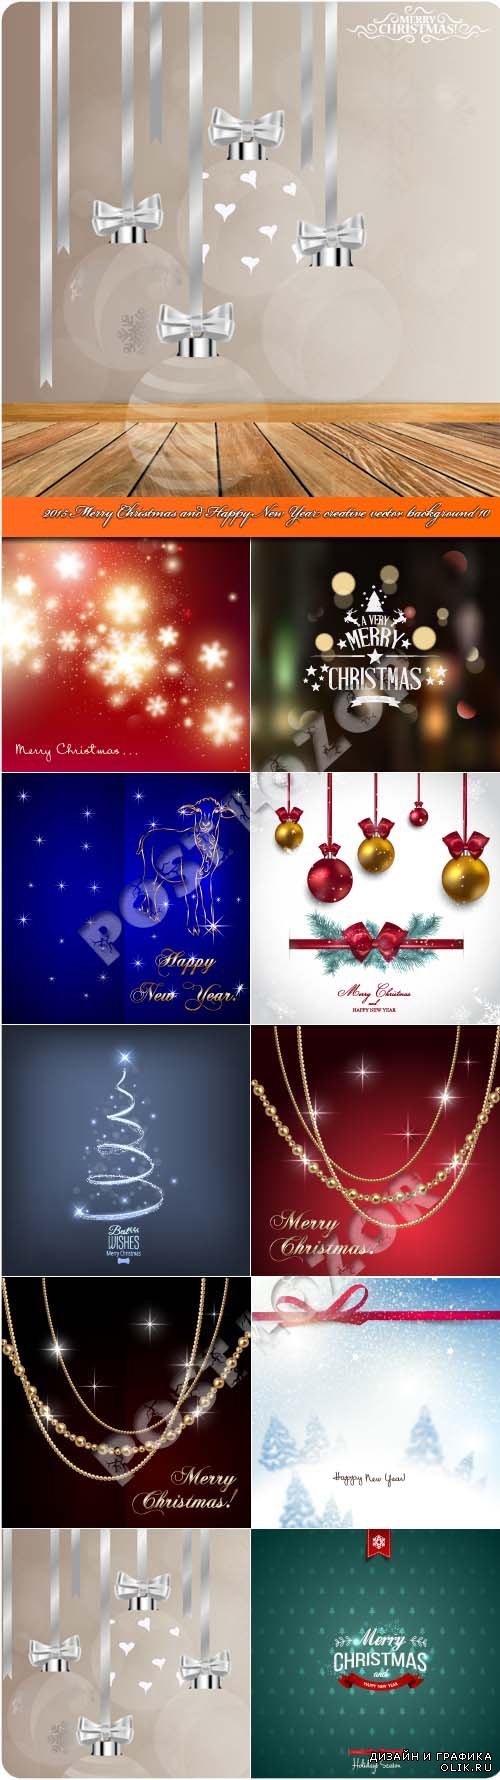 2015 Merry Christmas and Happy New Year creative vector background 10